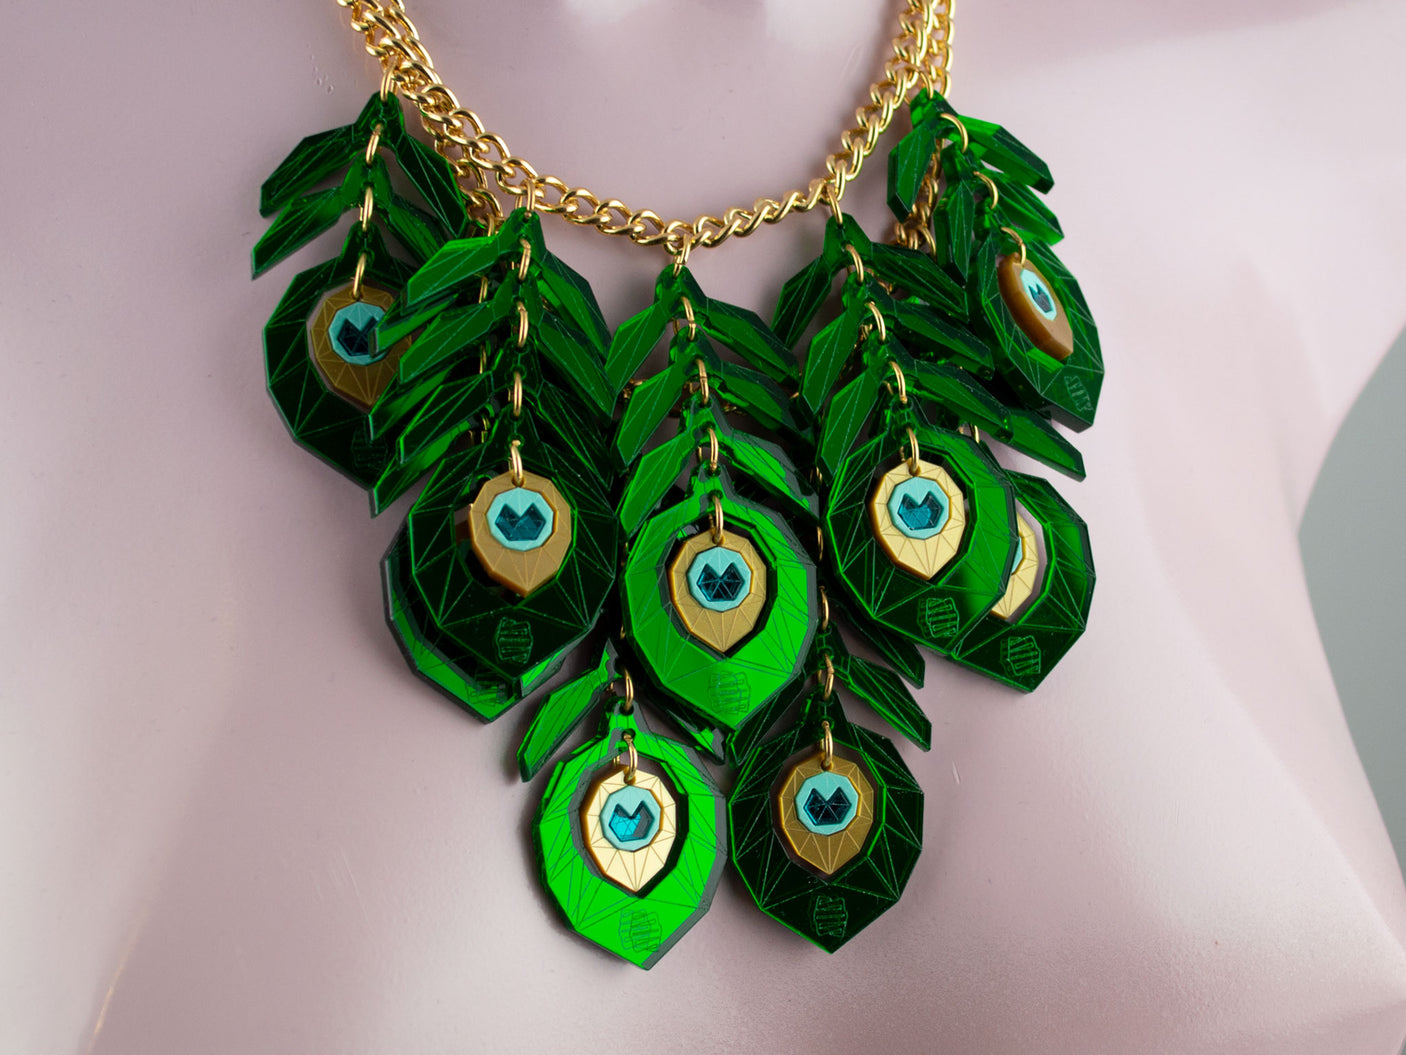 Peacock Feather Statement Necklace